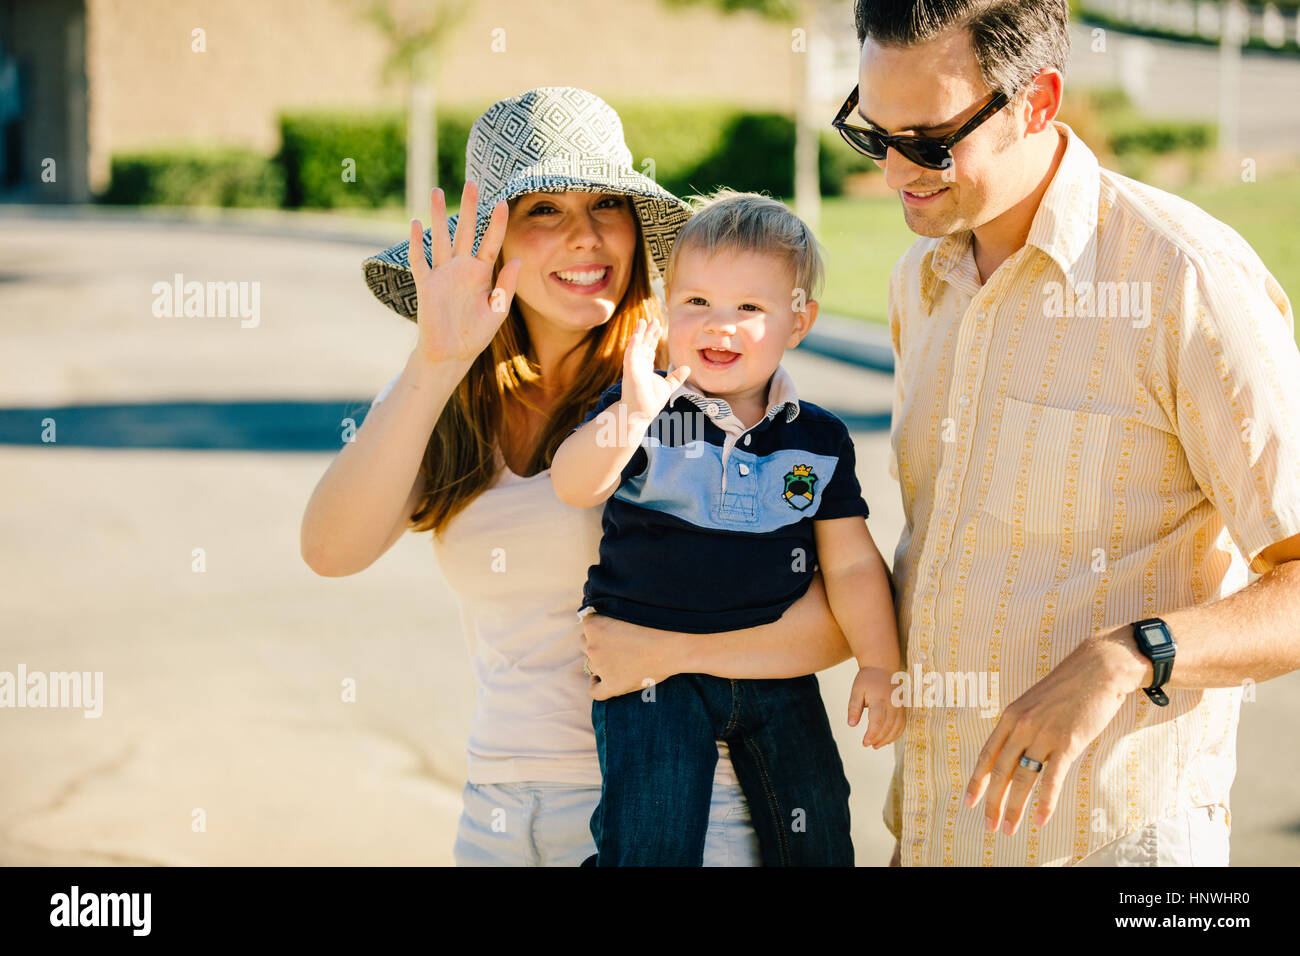 Young family standing together outdoors, mother and young son waving Stock Photo